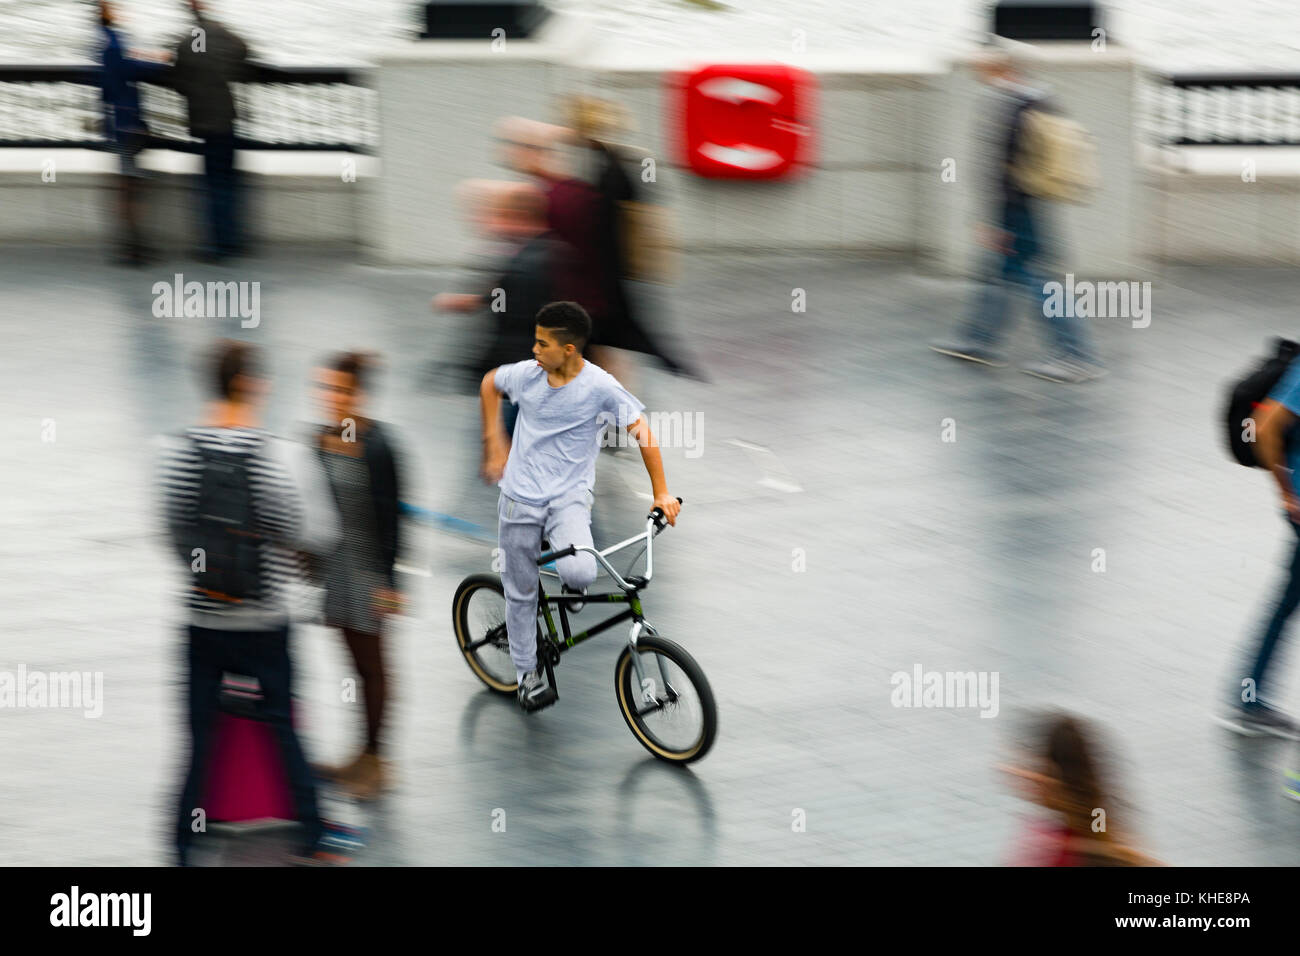 London, UK. A young teenager on a BMX rides through the crowds near City Hall on the south bank of the River Thames. Stock Photo